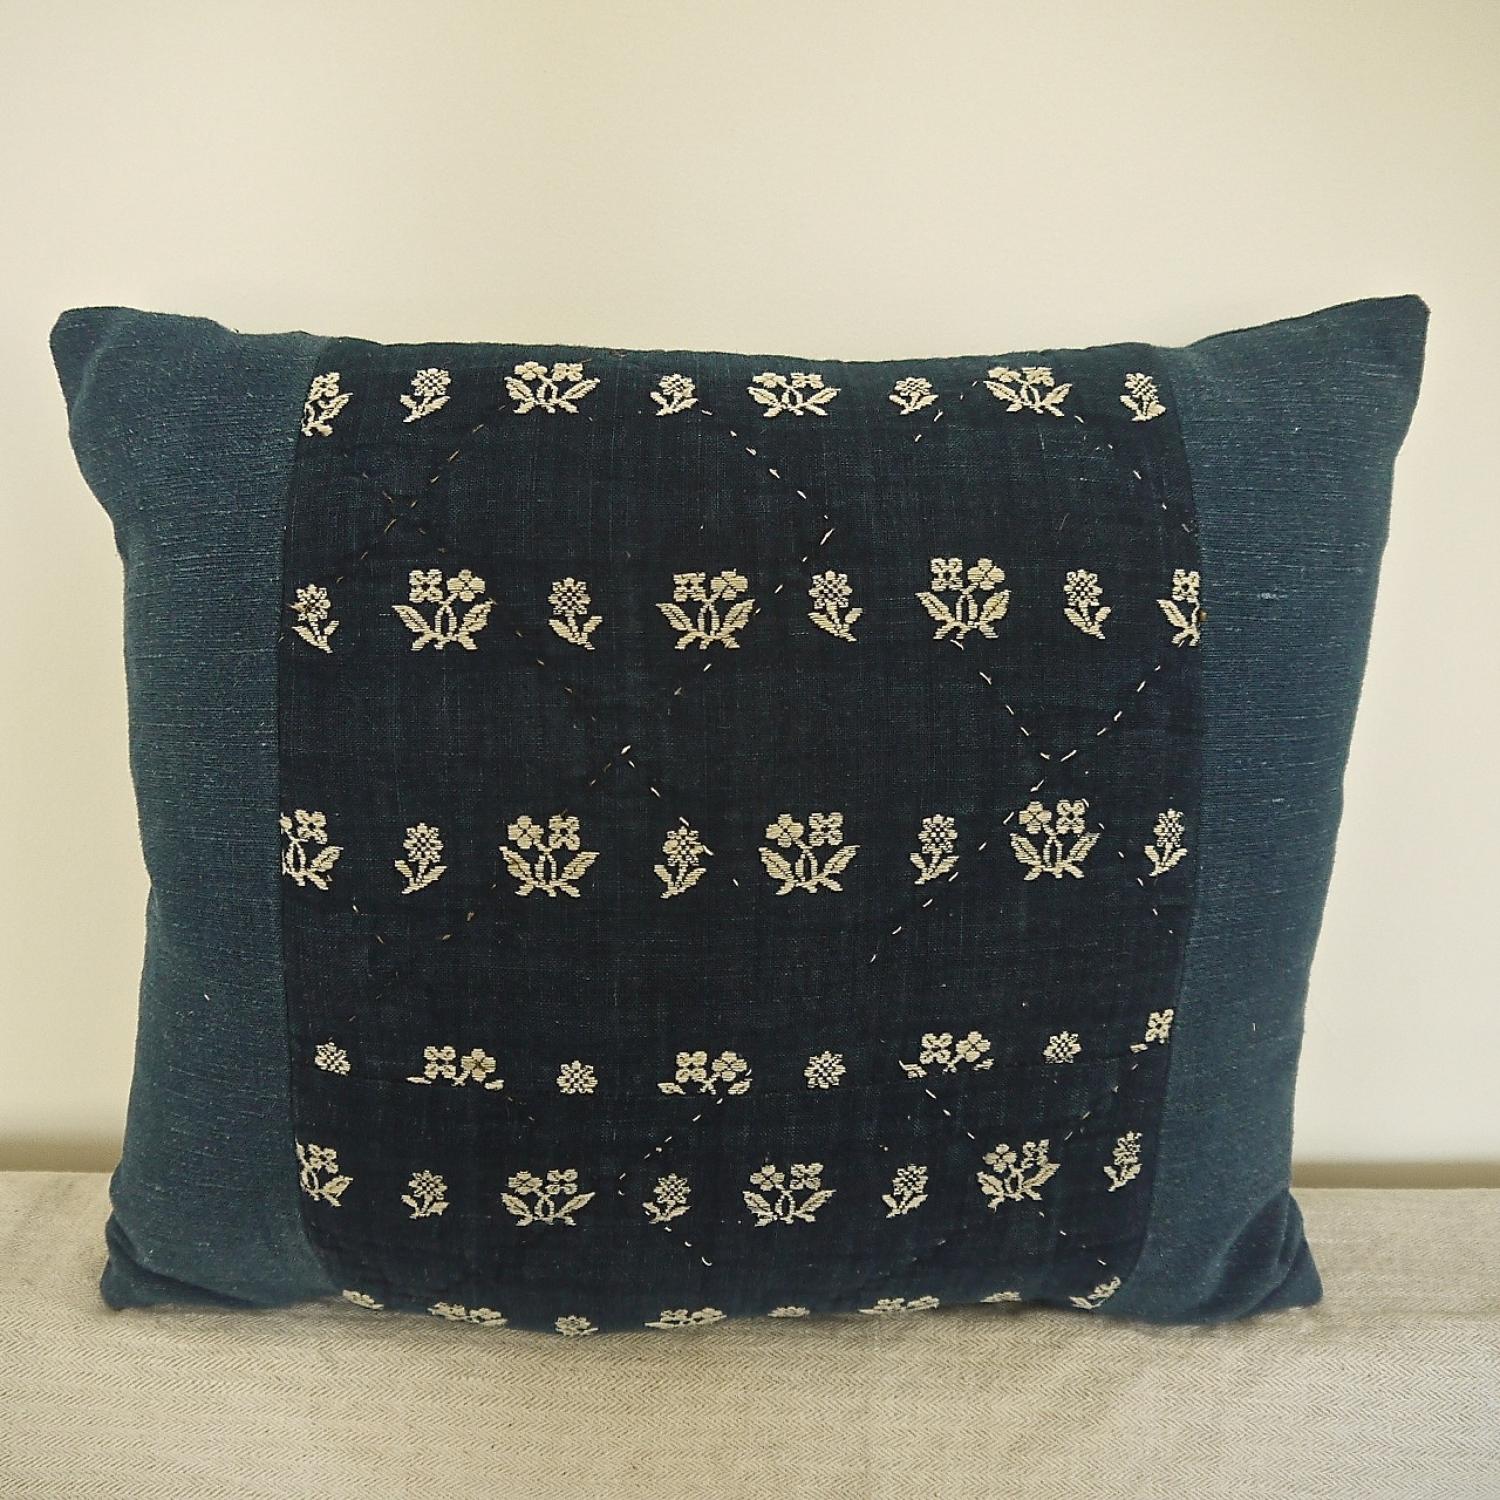 Late 18th century French wool woven on indigo linen cushion